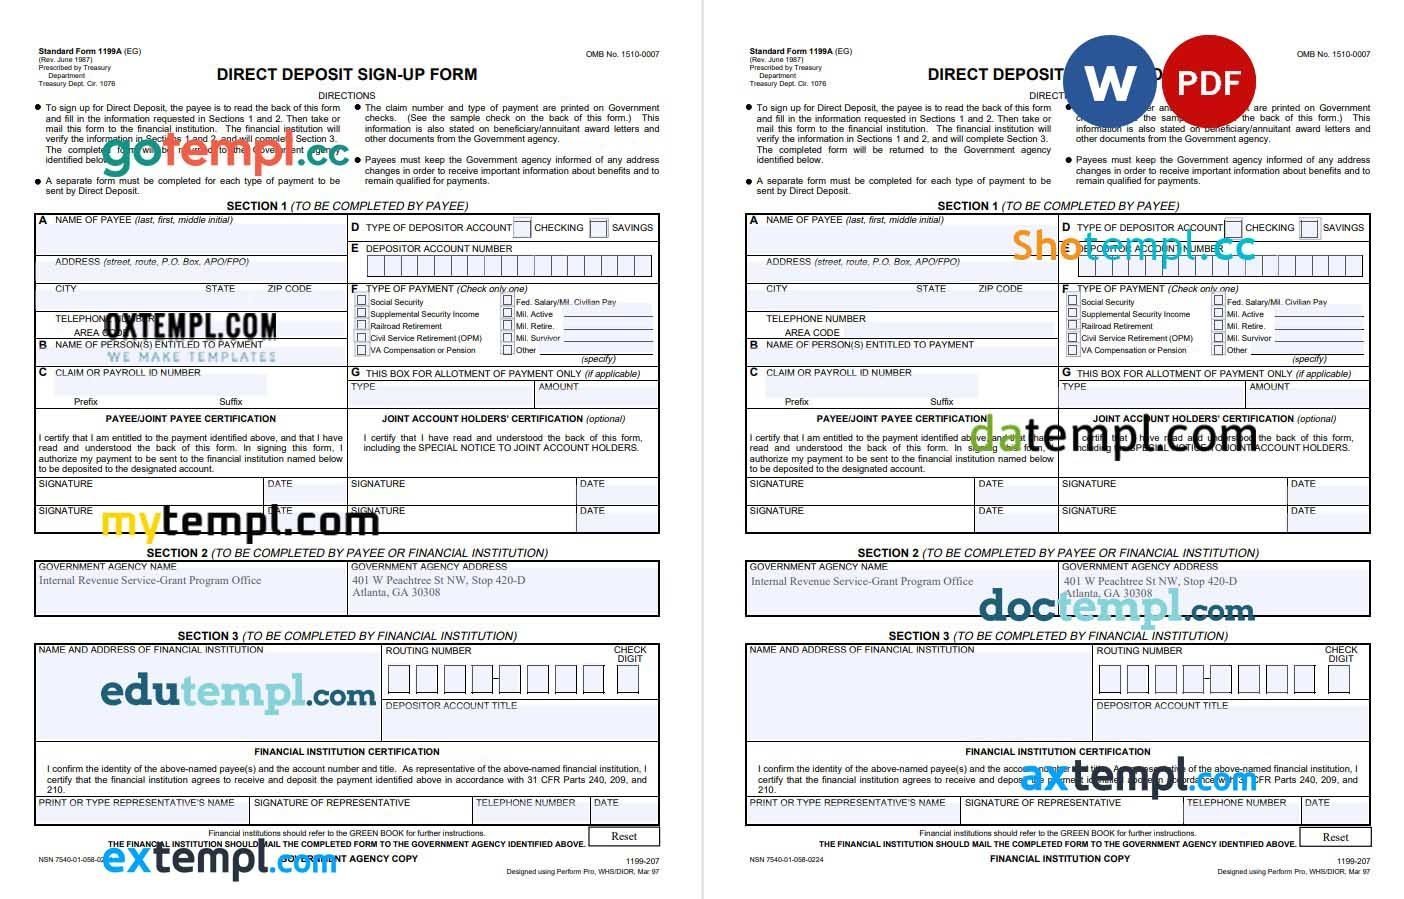 Standard Direct Deposit Signup Form example, fully editable